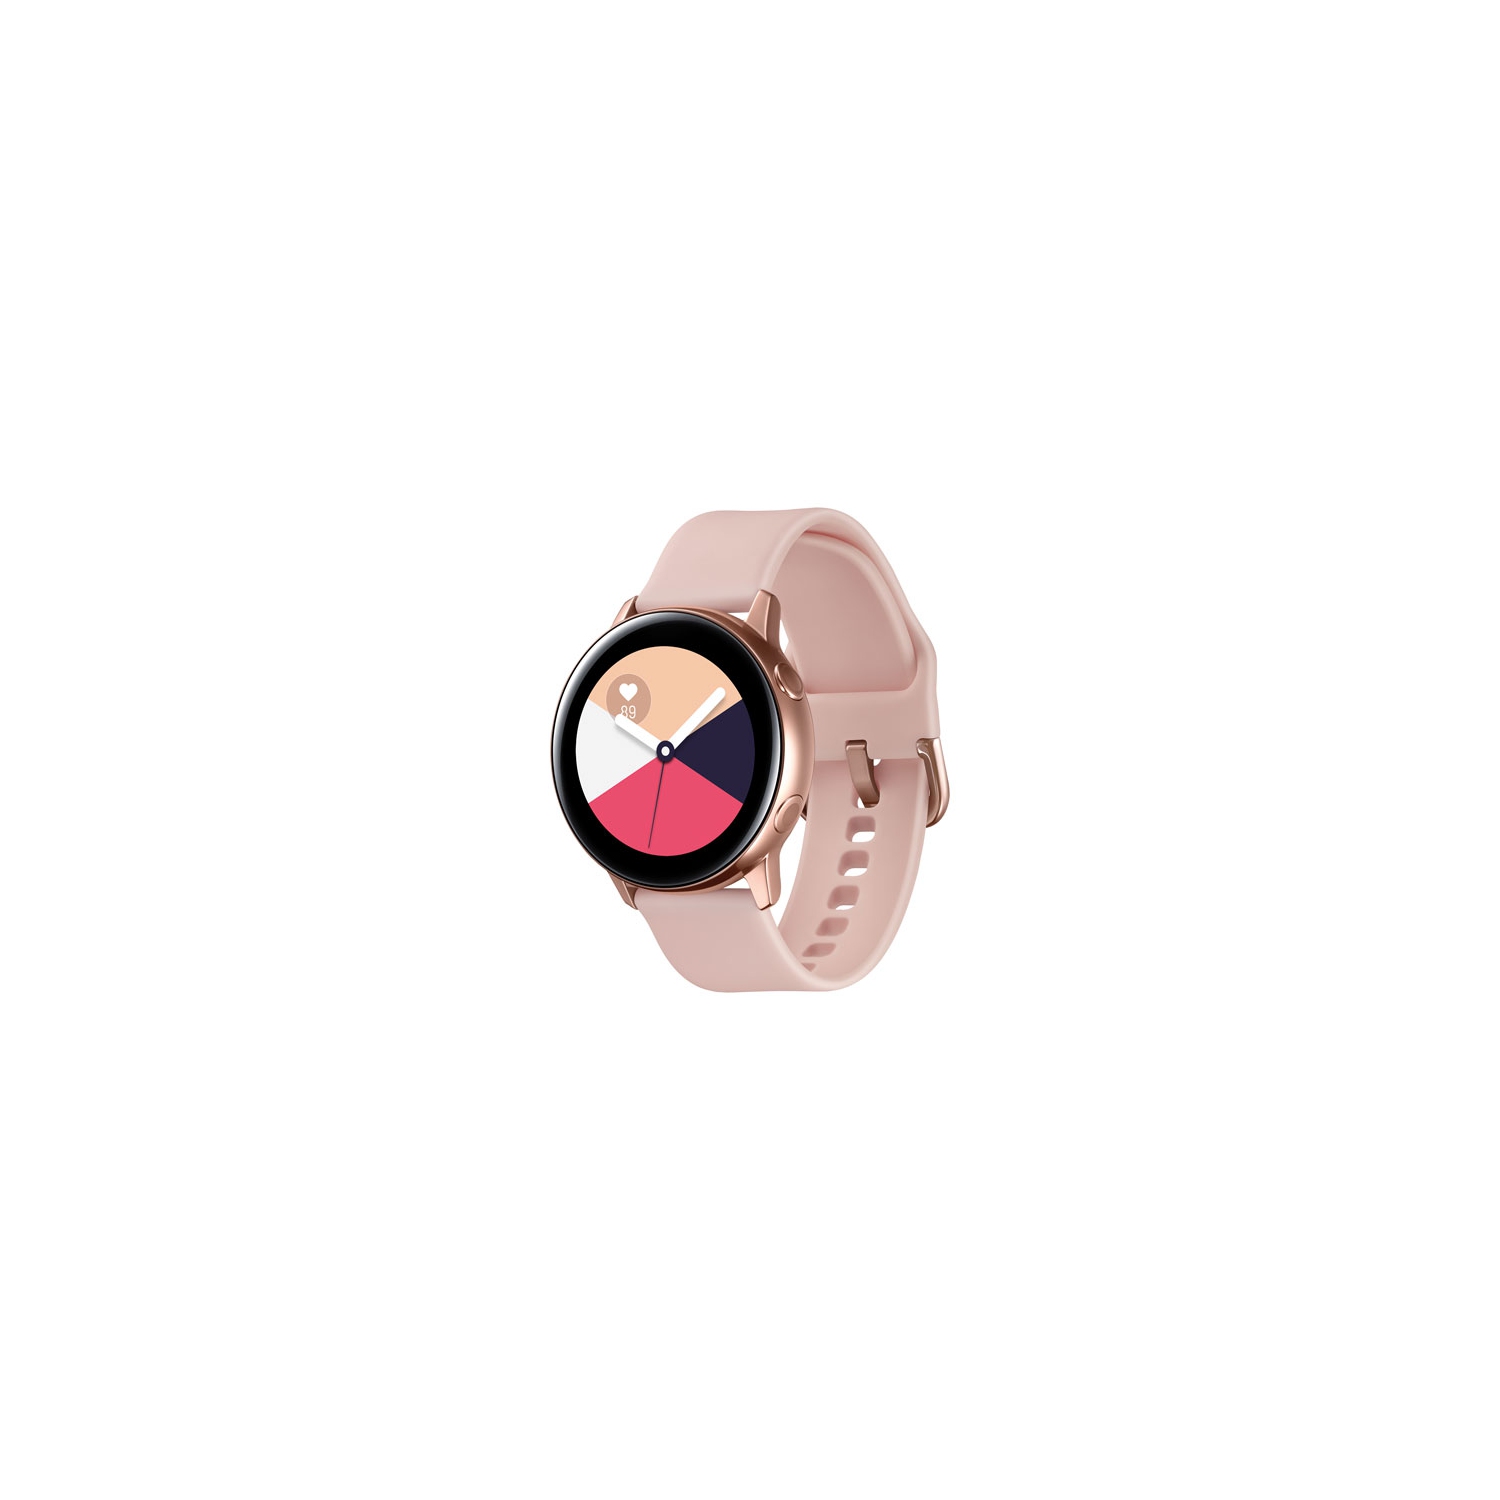 Refurbished (Good) - Samsung Galaxy Watch Active 40mm Smartwatch with Heart Rate Monitor - Rose Gold